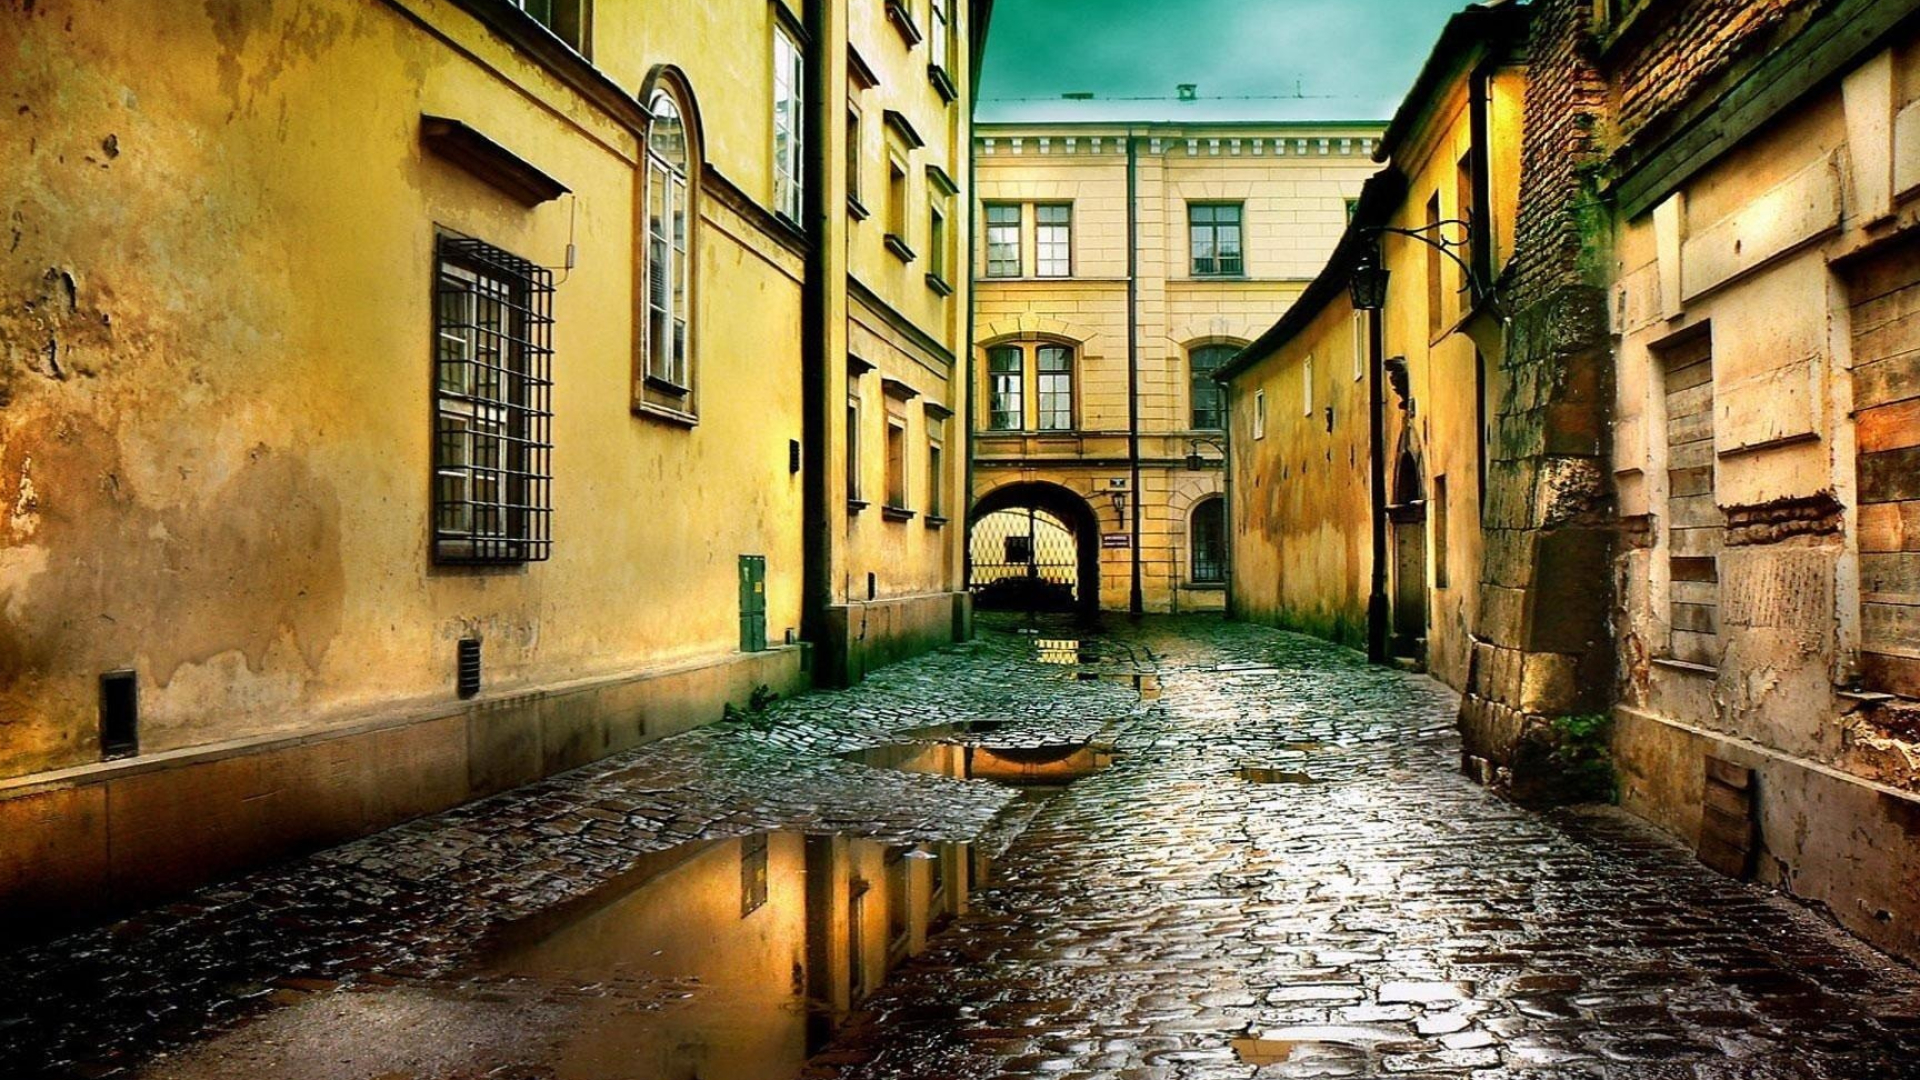 Alley: Cobblestone street after the rain, A town in the Spanish style, City road, City street. 1920x1080 Full HD Background.